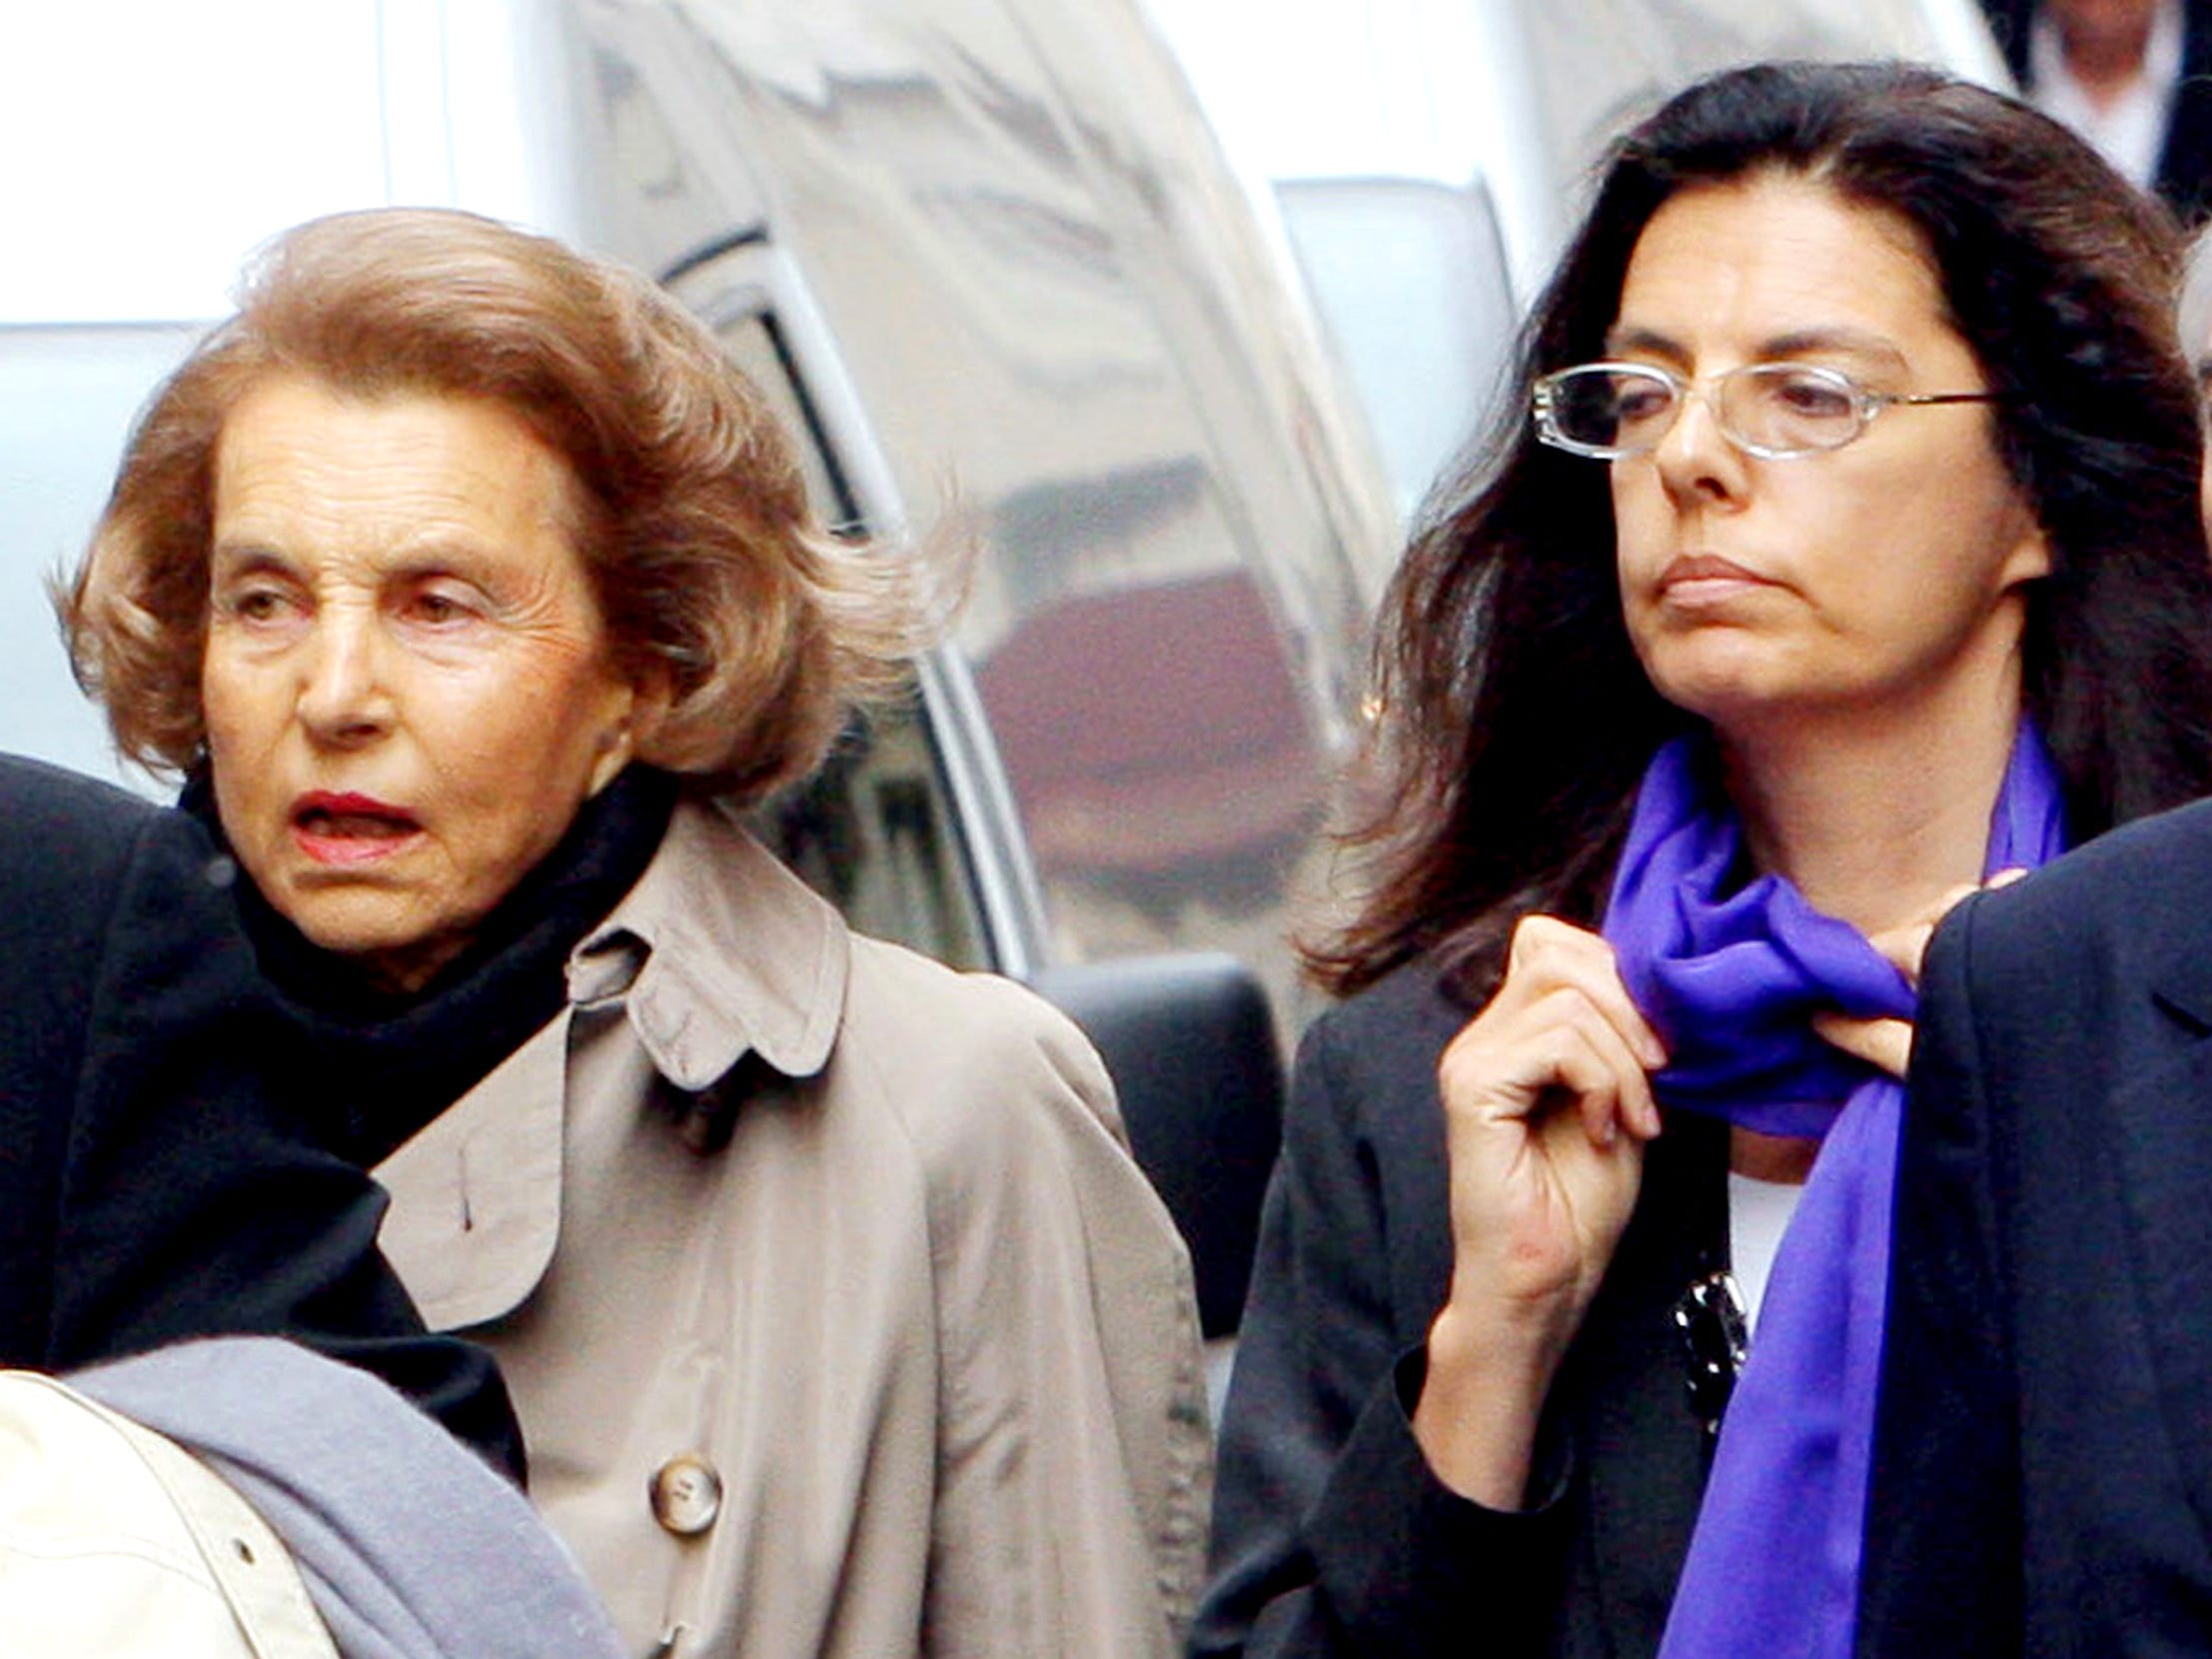 Liliane Bettencourt and her daughter Francoise Bettencourt-Meyers walk next to car